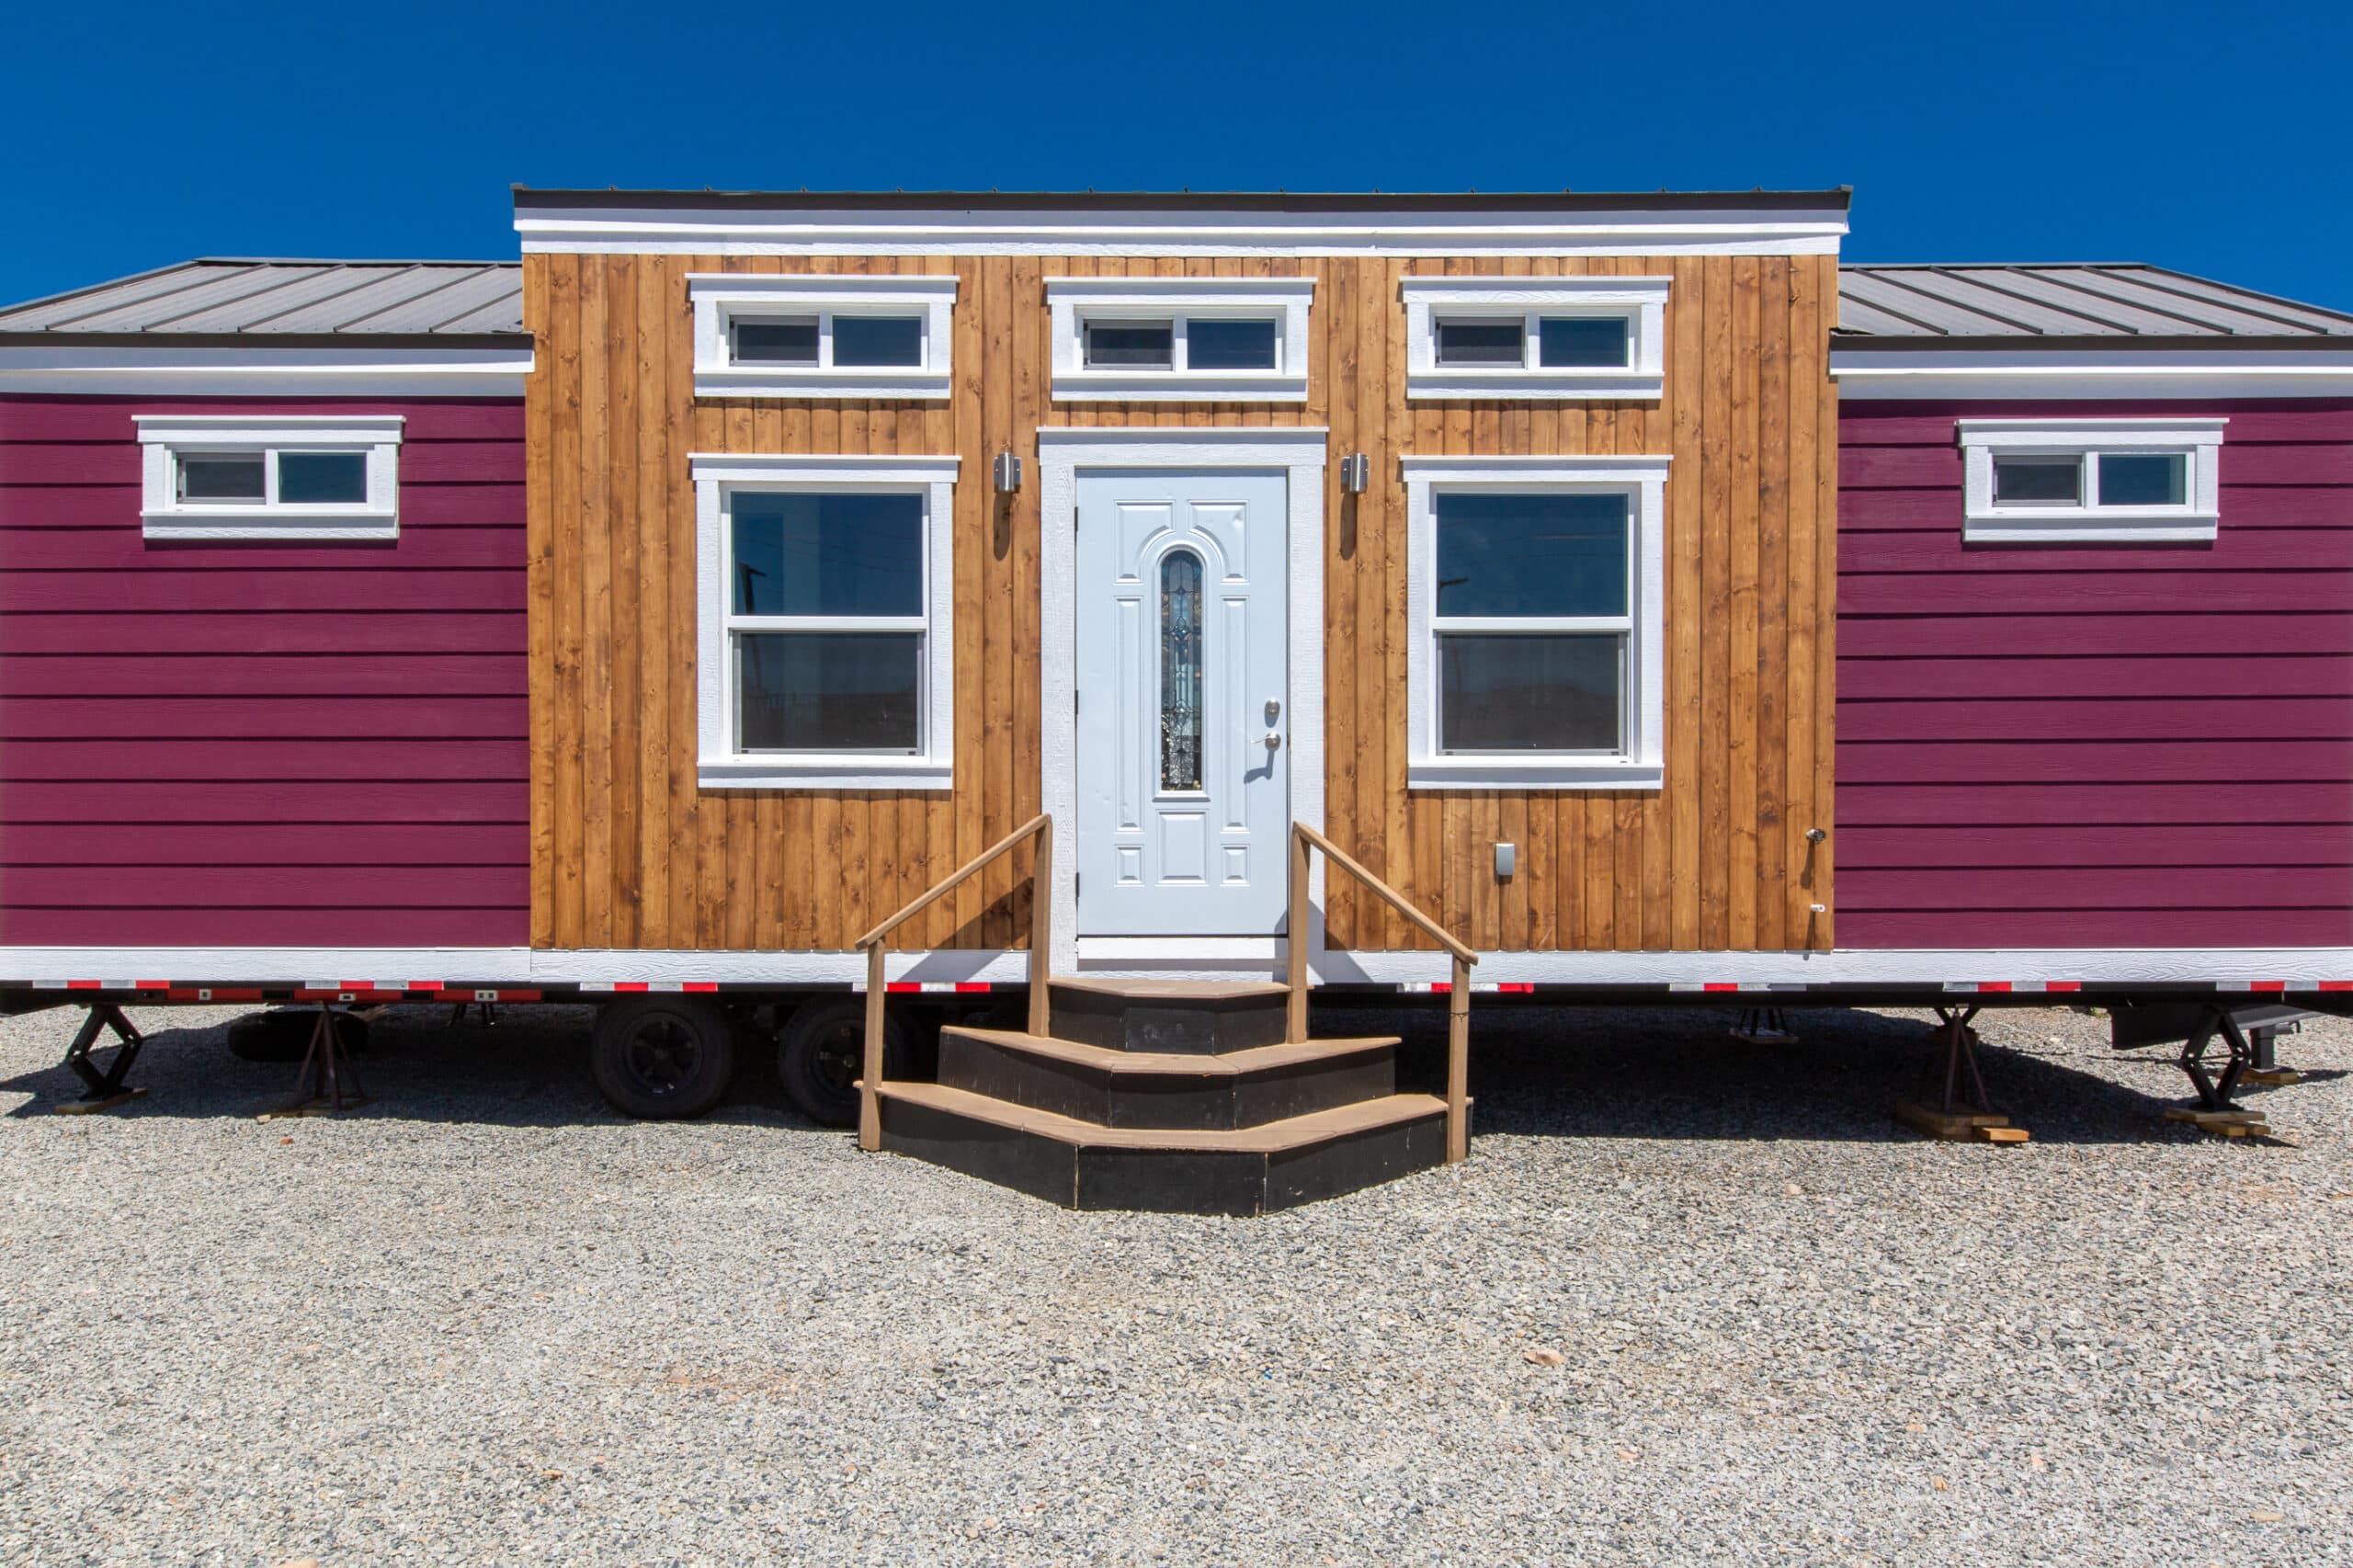 How to Find Land for Tiny Houses? - United Tiny Homes